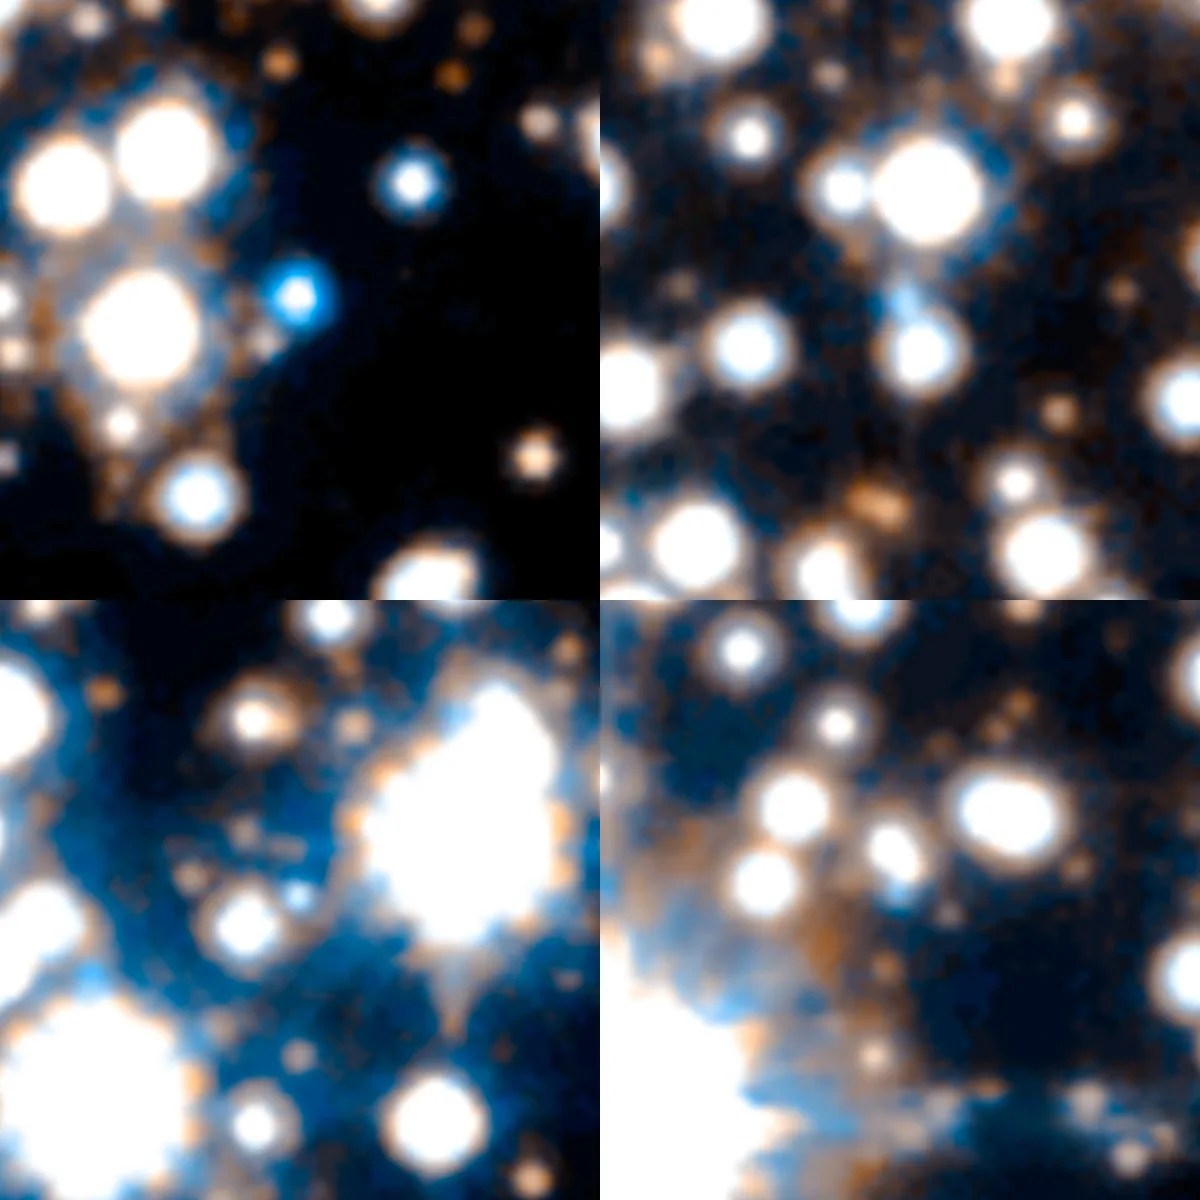 Sample of 4 out of the 70 brightest white dwarfs spied by Hubble in the Milky Way's bulge